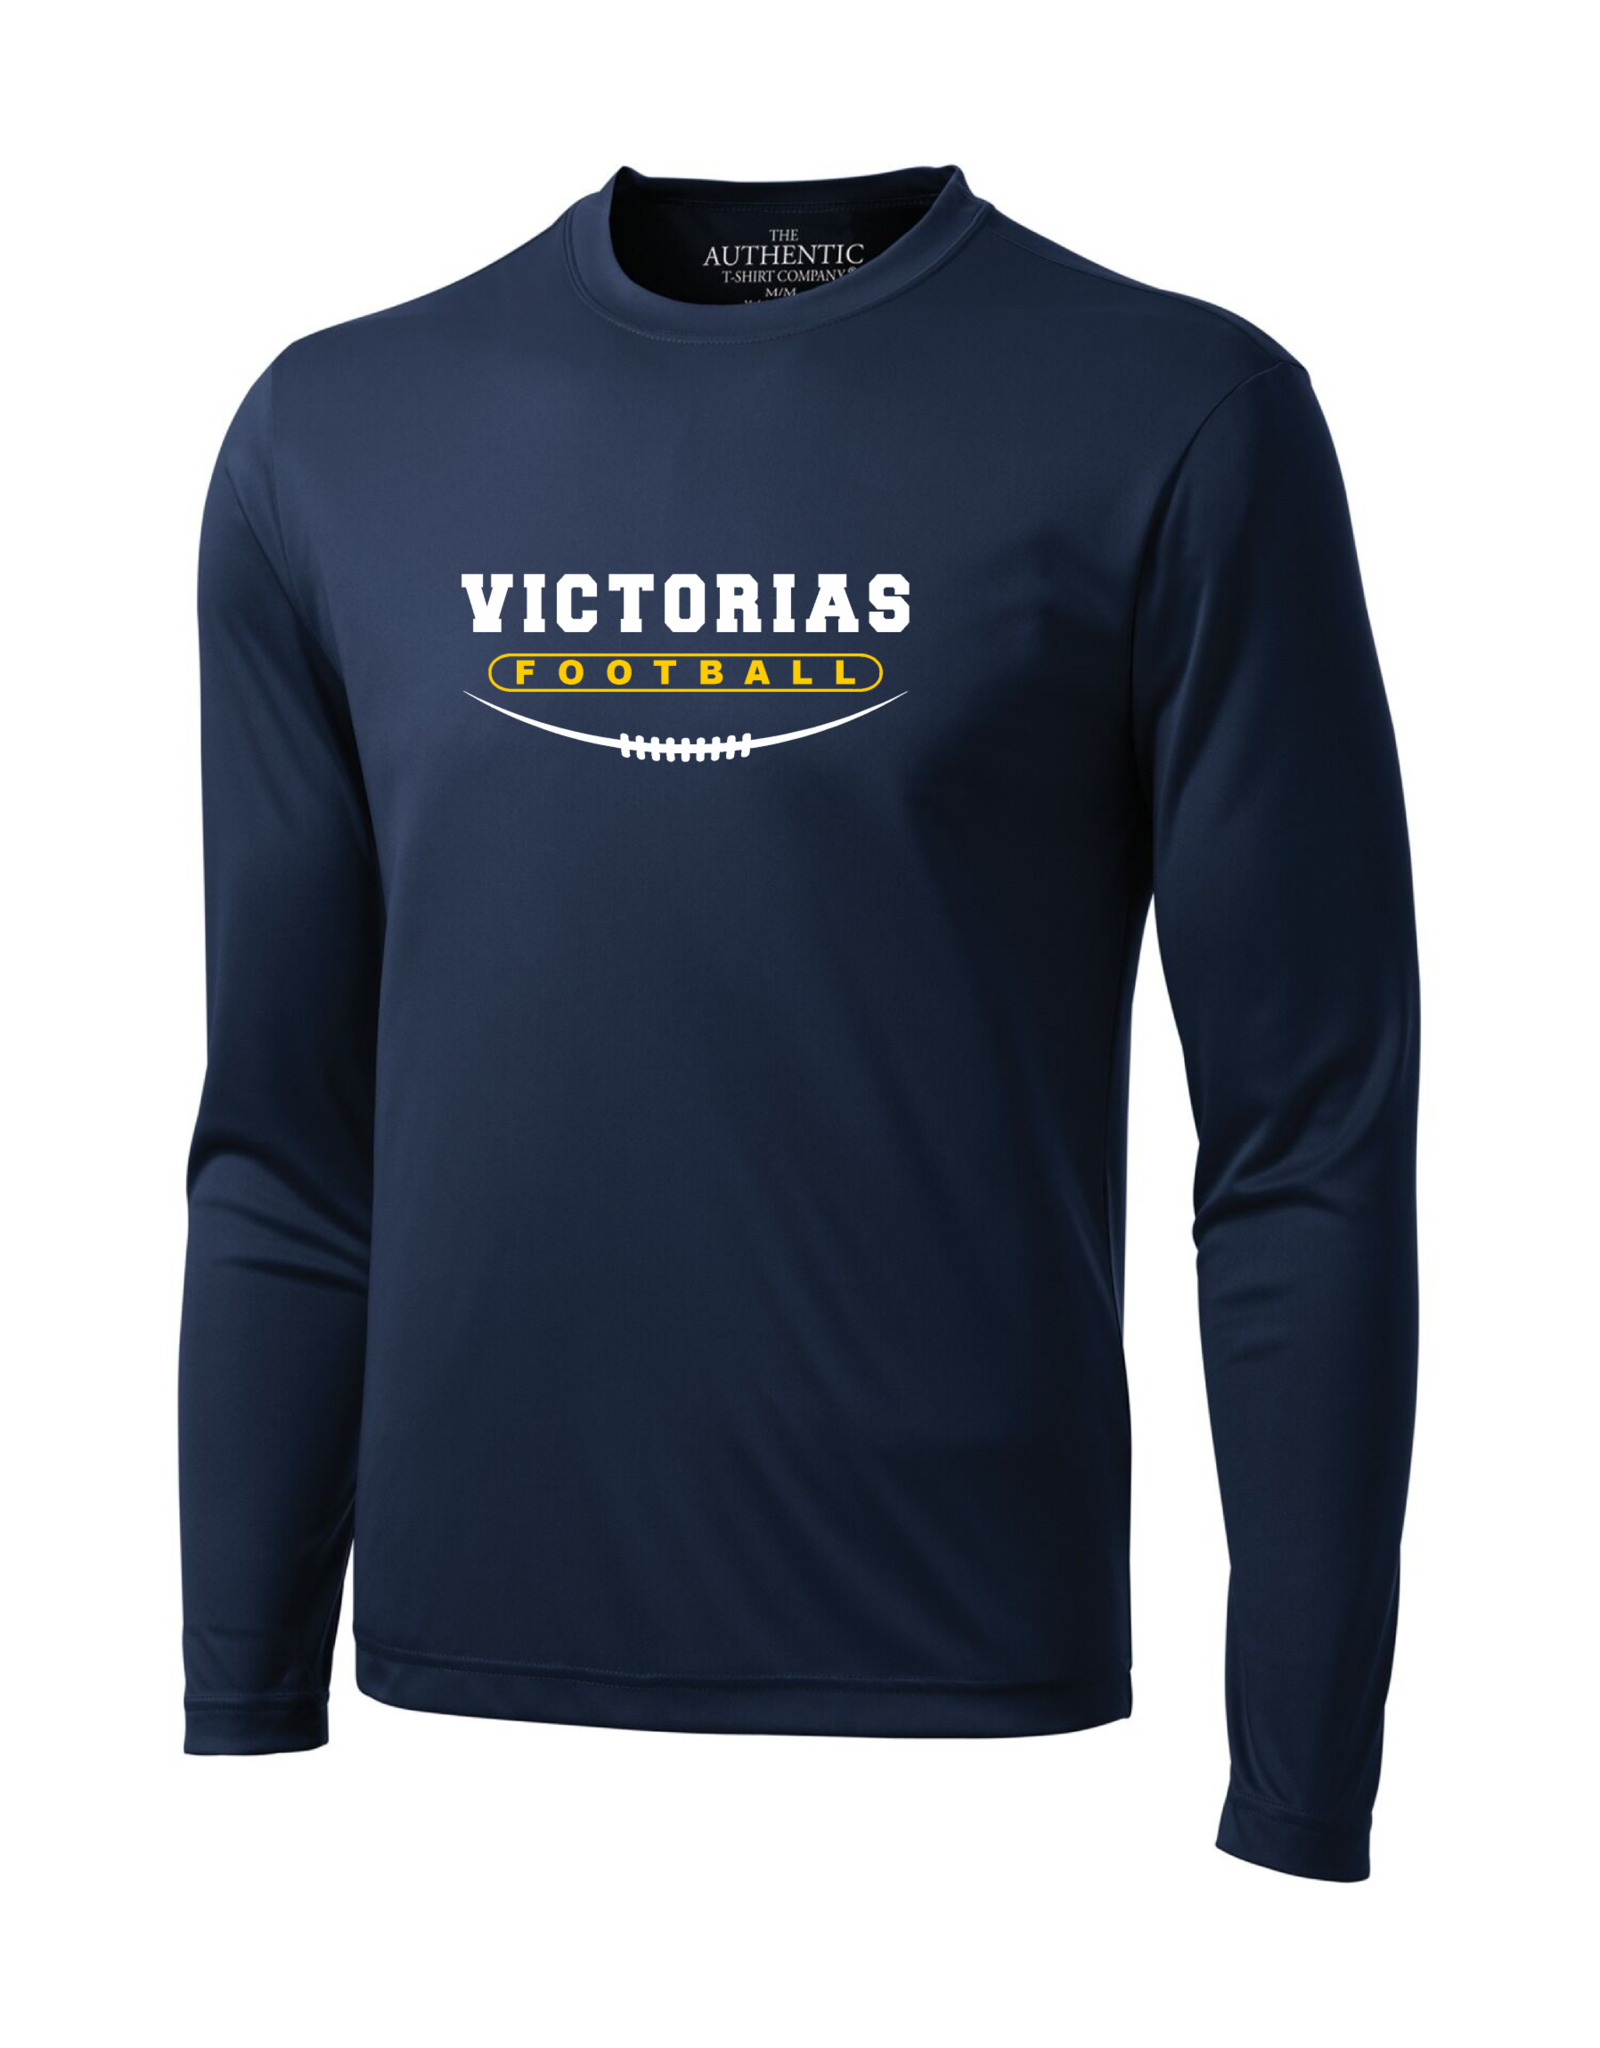 Victorias Youth ATC Long Sleeve